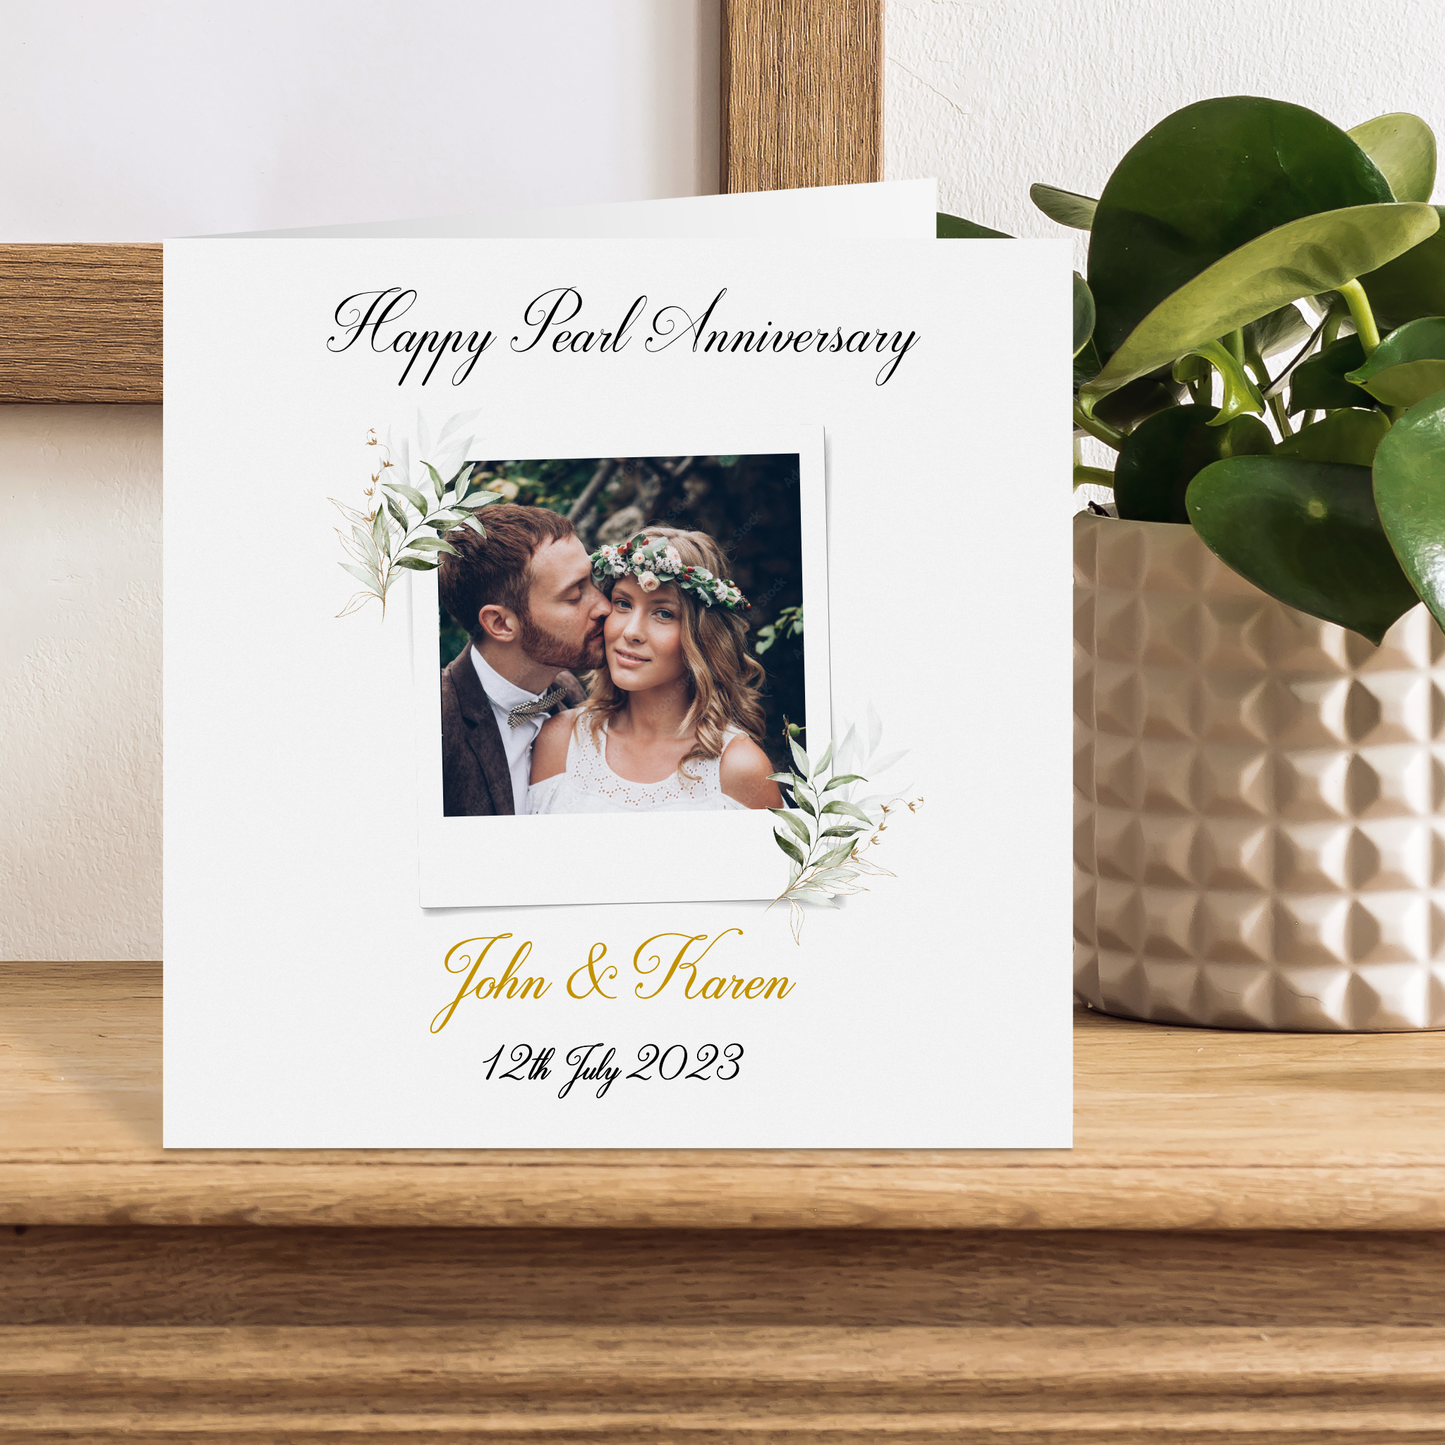 Personalised Photo Card For Anniversary